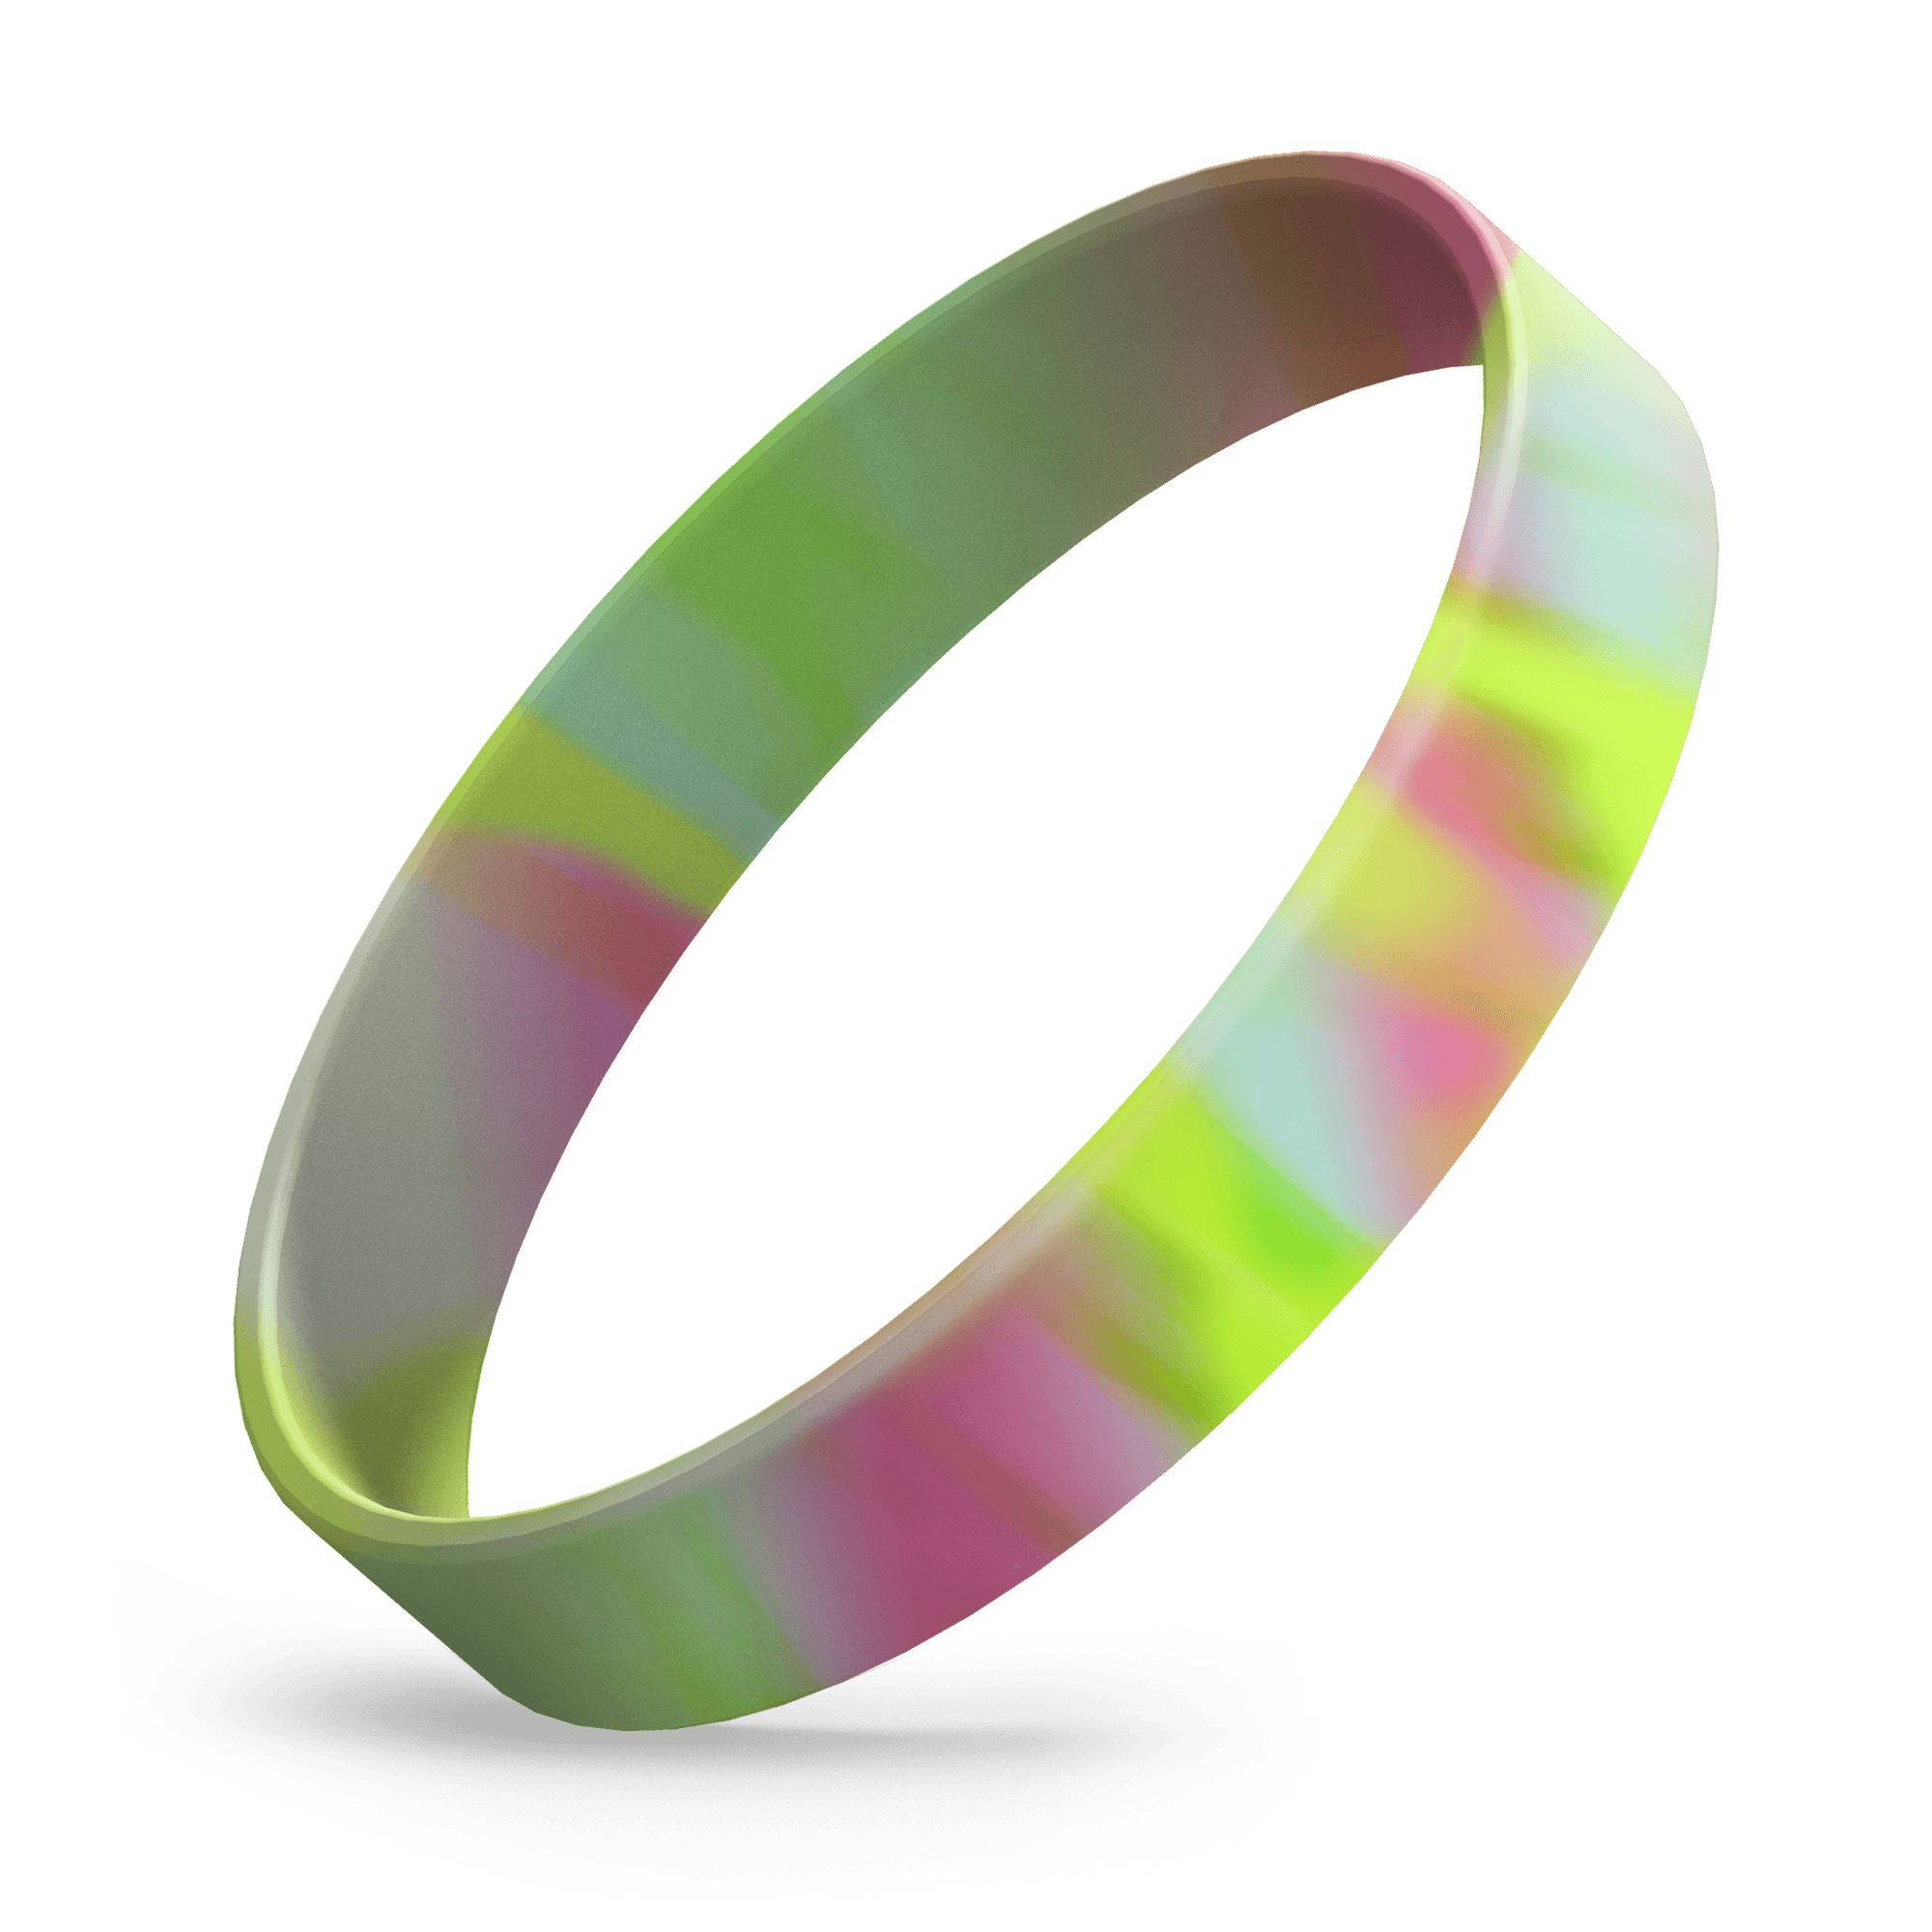 Custom Printed (Hot Pink / Light Blue / Lime Green Swirl) Silicone Wristbands - Rubber Bracelets by Wristband Resources